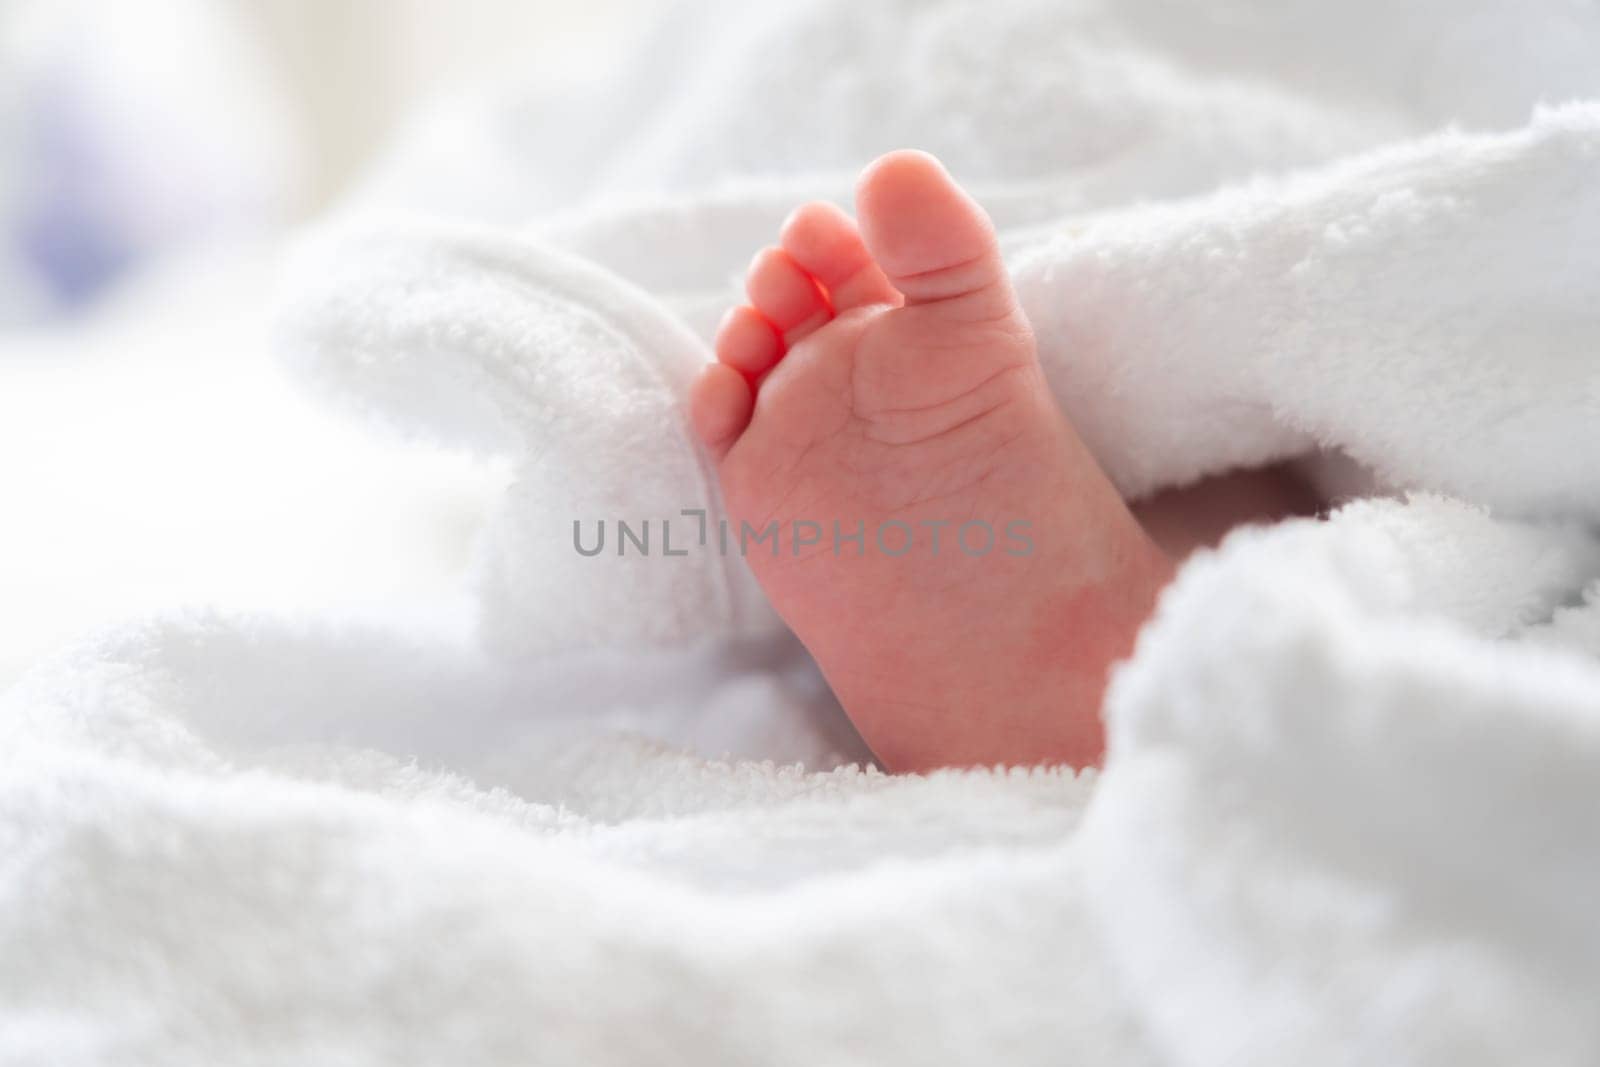 Following a soothing bath, the tiny foot of an infant peeks curiously from beneath a plush white towel, capturing a serene moment of newborn care